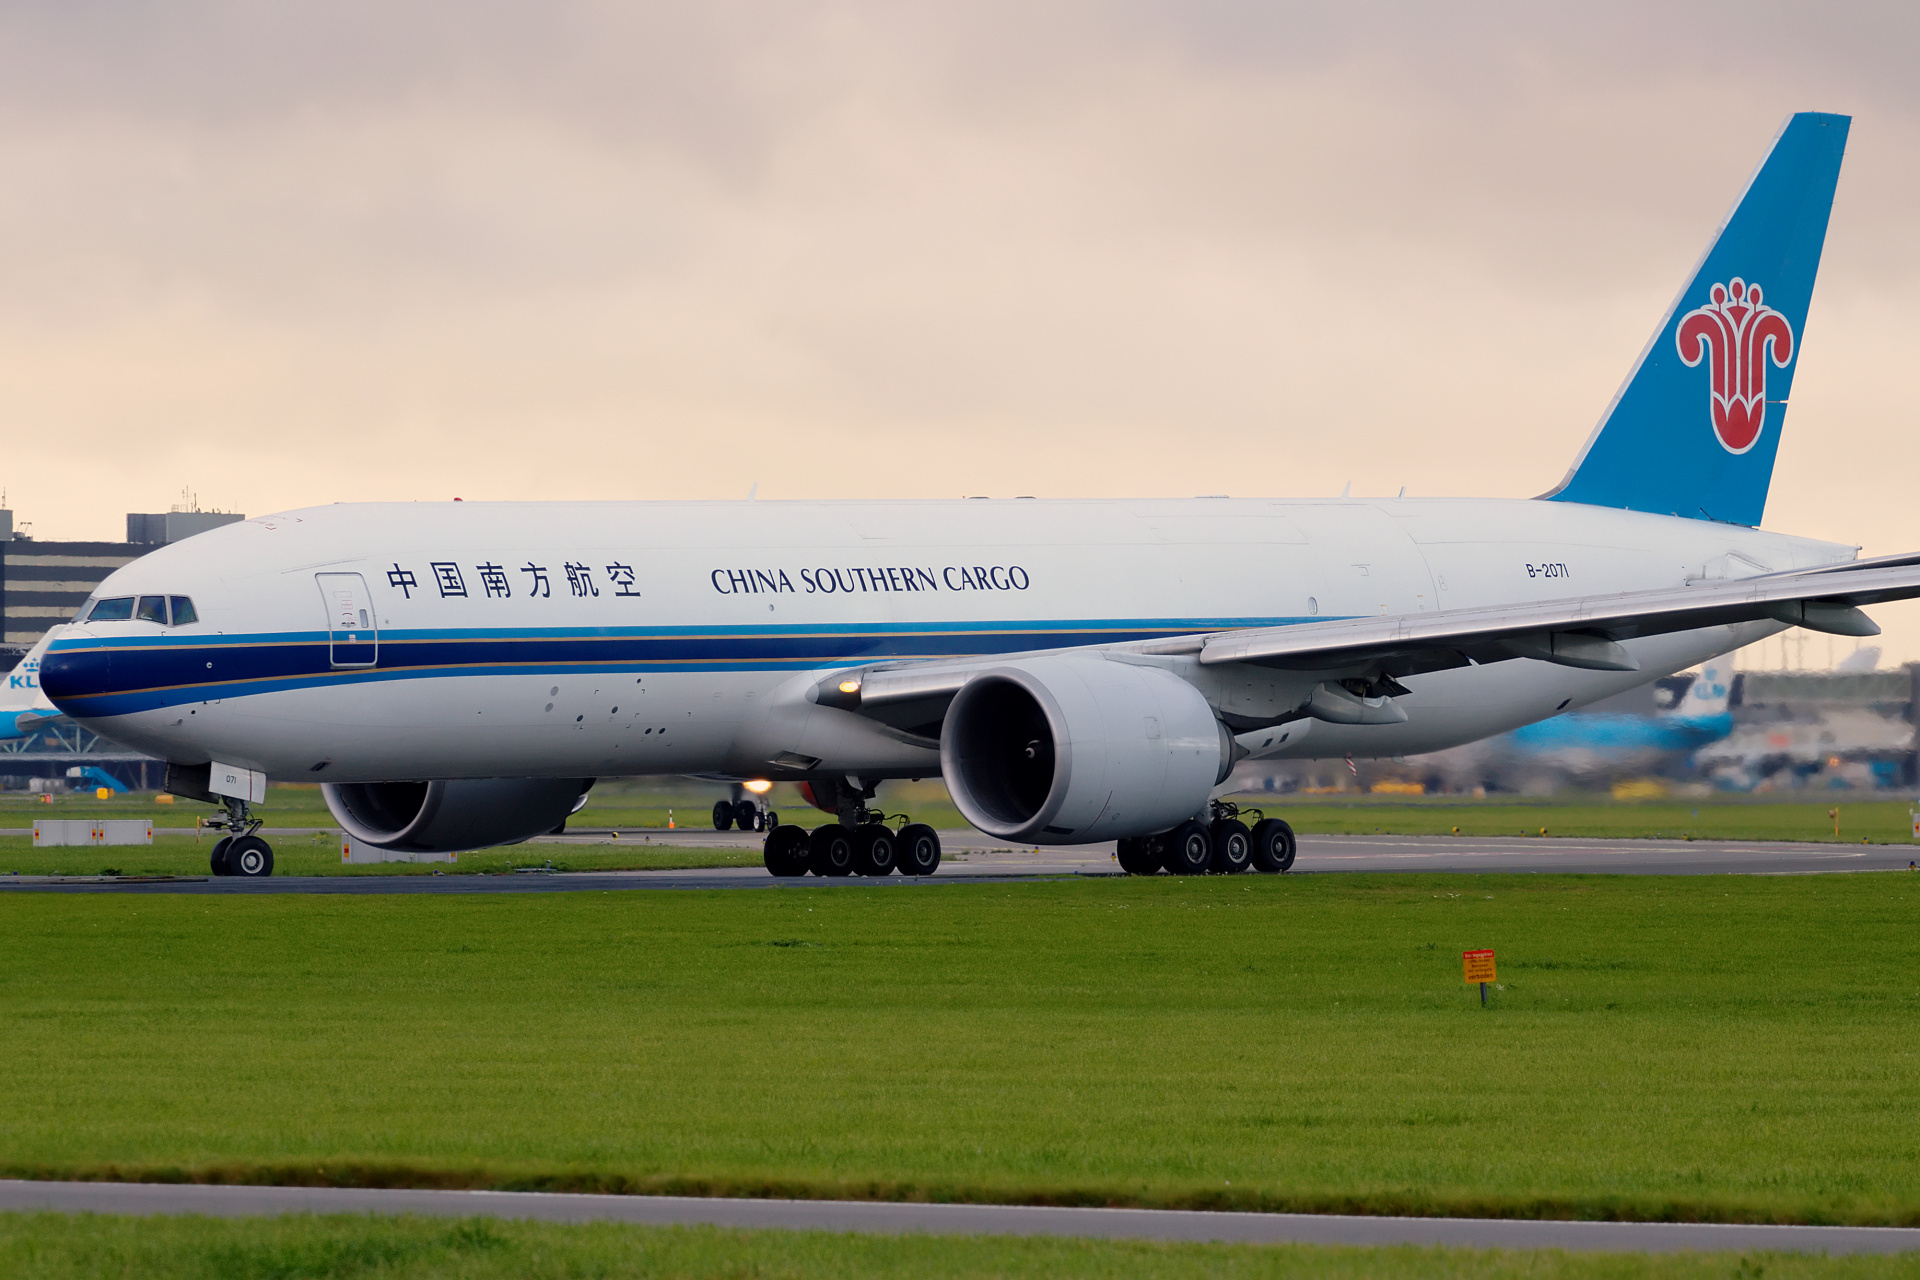 B-2071 (Aircraft » Schiphol Spotting » Boeing 777F » China Southern Cargo)